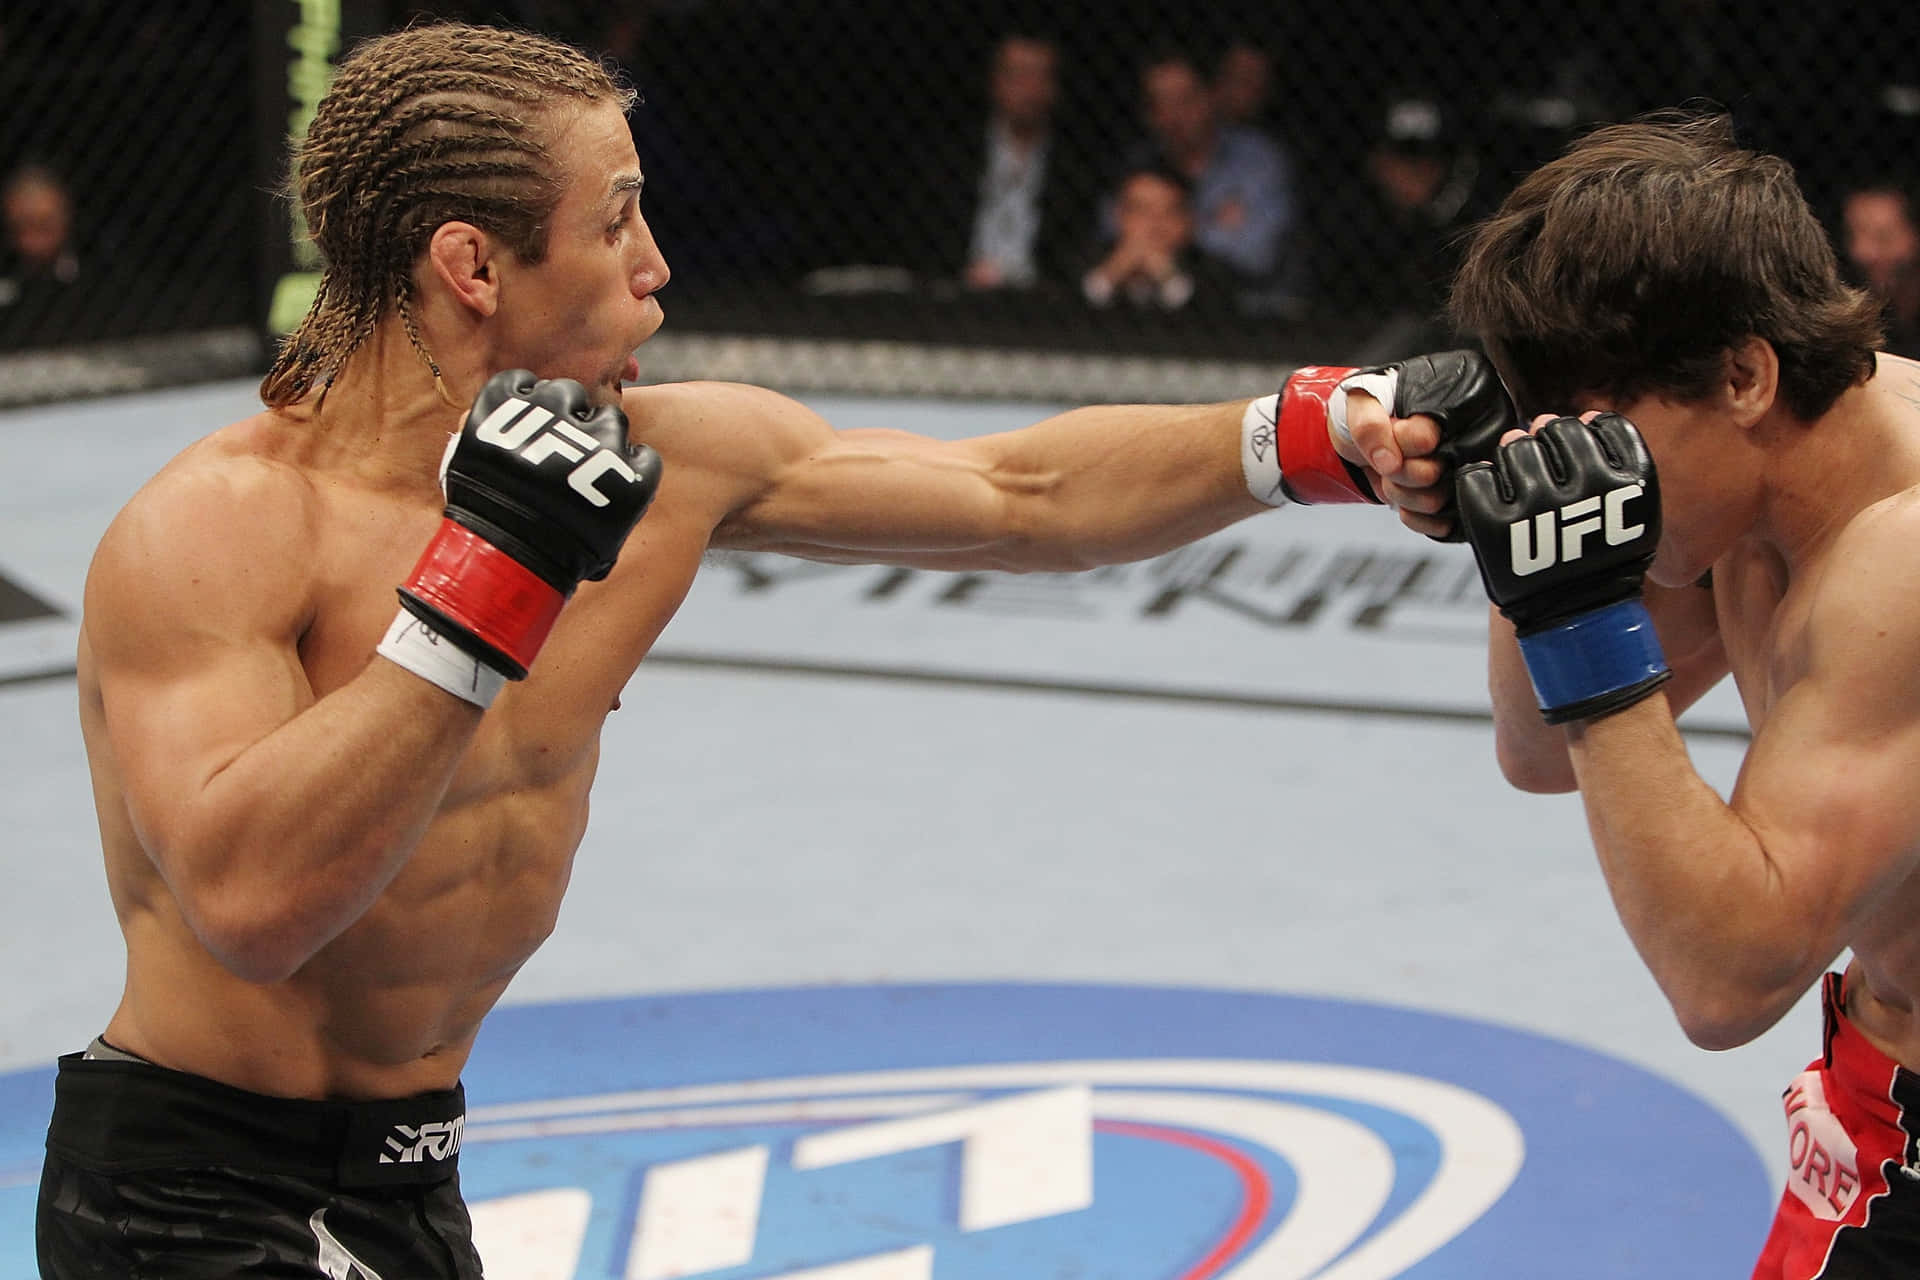 Brian Bowles faces off against Urijah Faber in intense battle Wallpaper